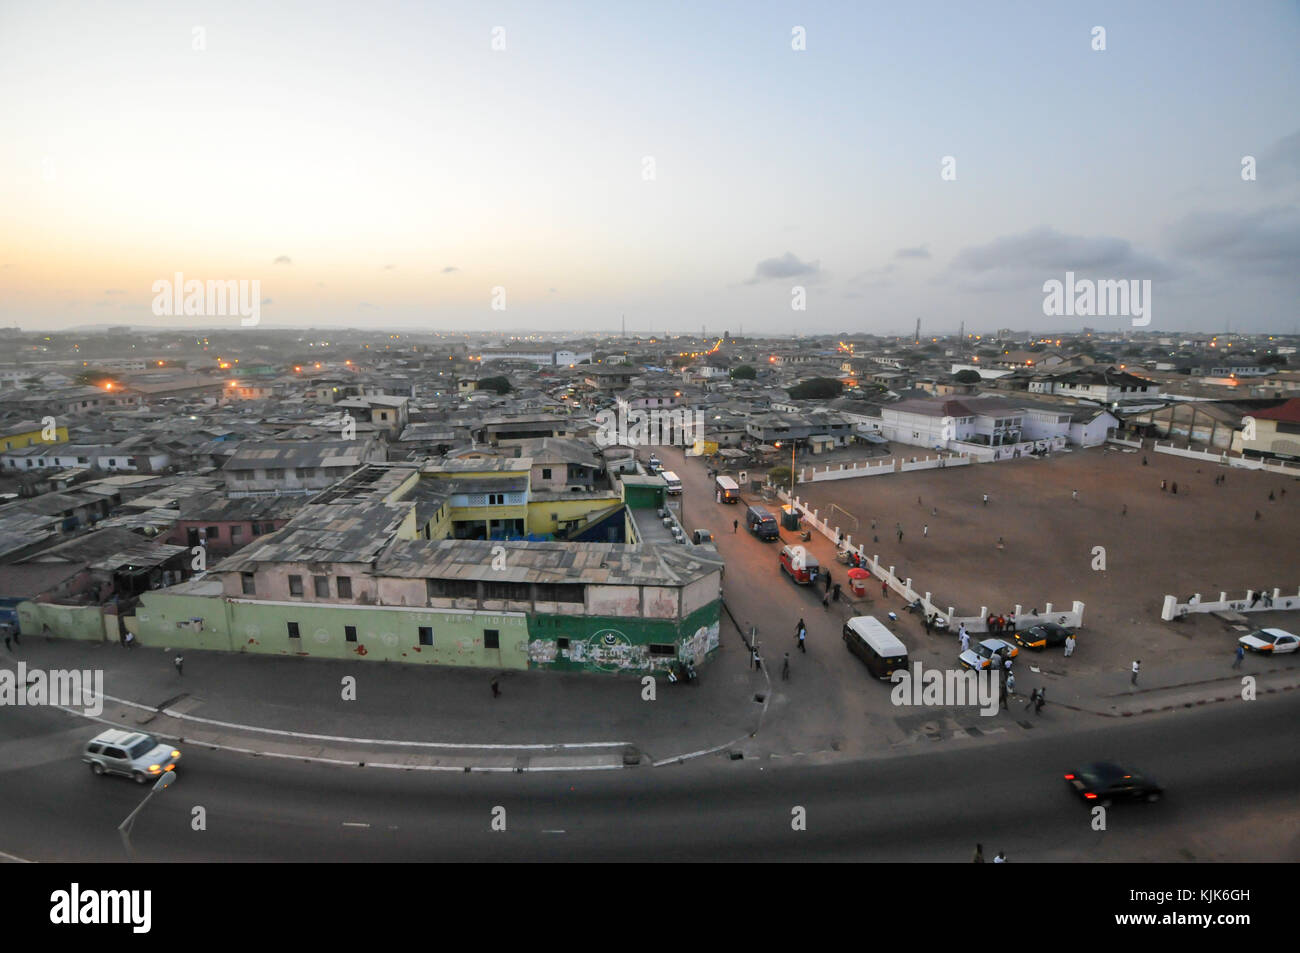 ACCRA, GHANA - APRIL 29, 2012: Panoramic view of Accra, Ghana in the evening from the Jamestown Lighthouse. Stock Photo